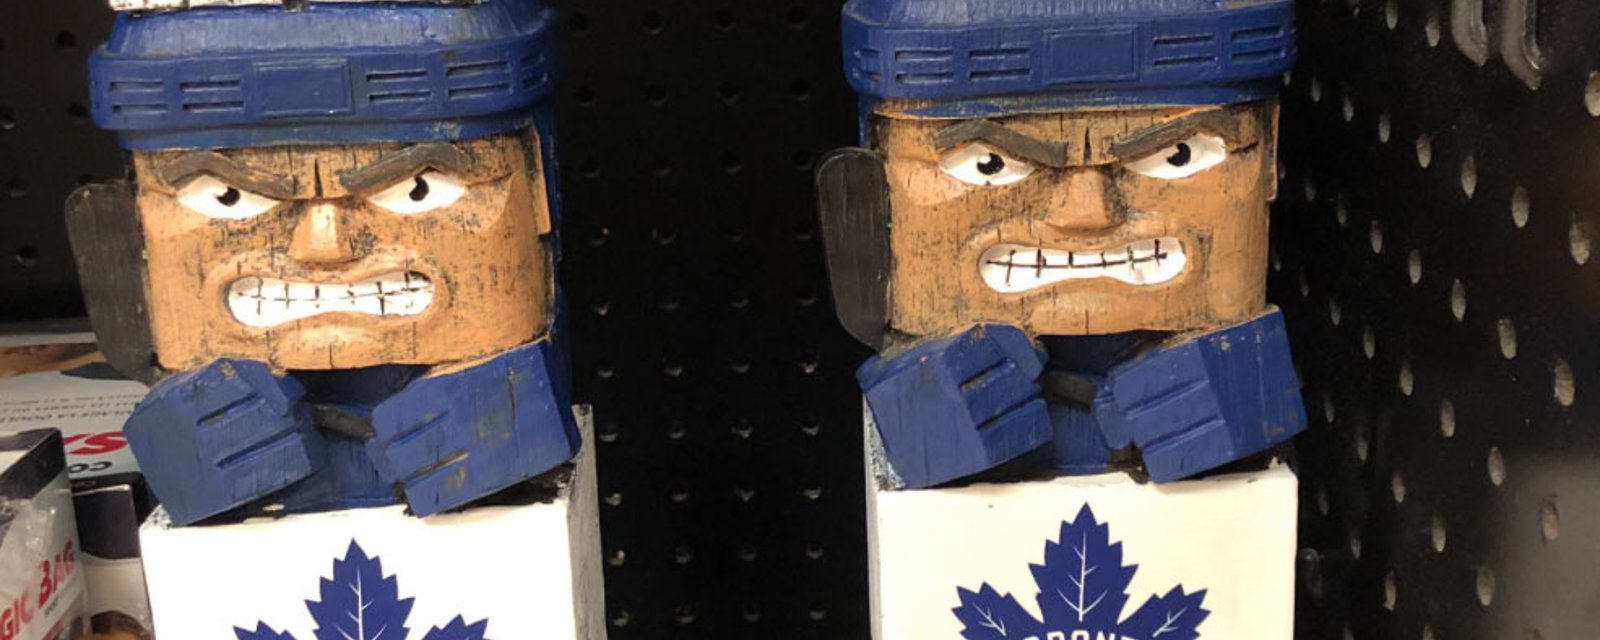 NHL merchandise pulled from stores due to 'blatant cultural appropriation'